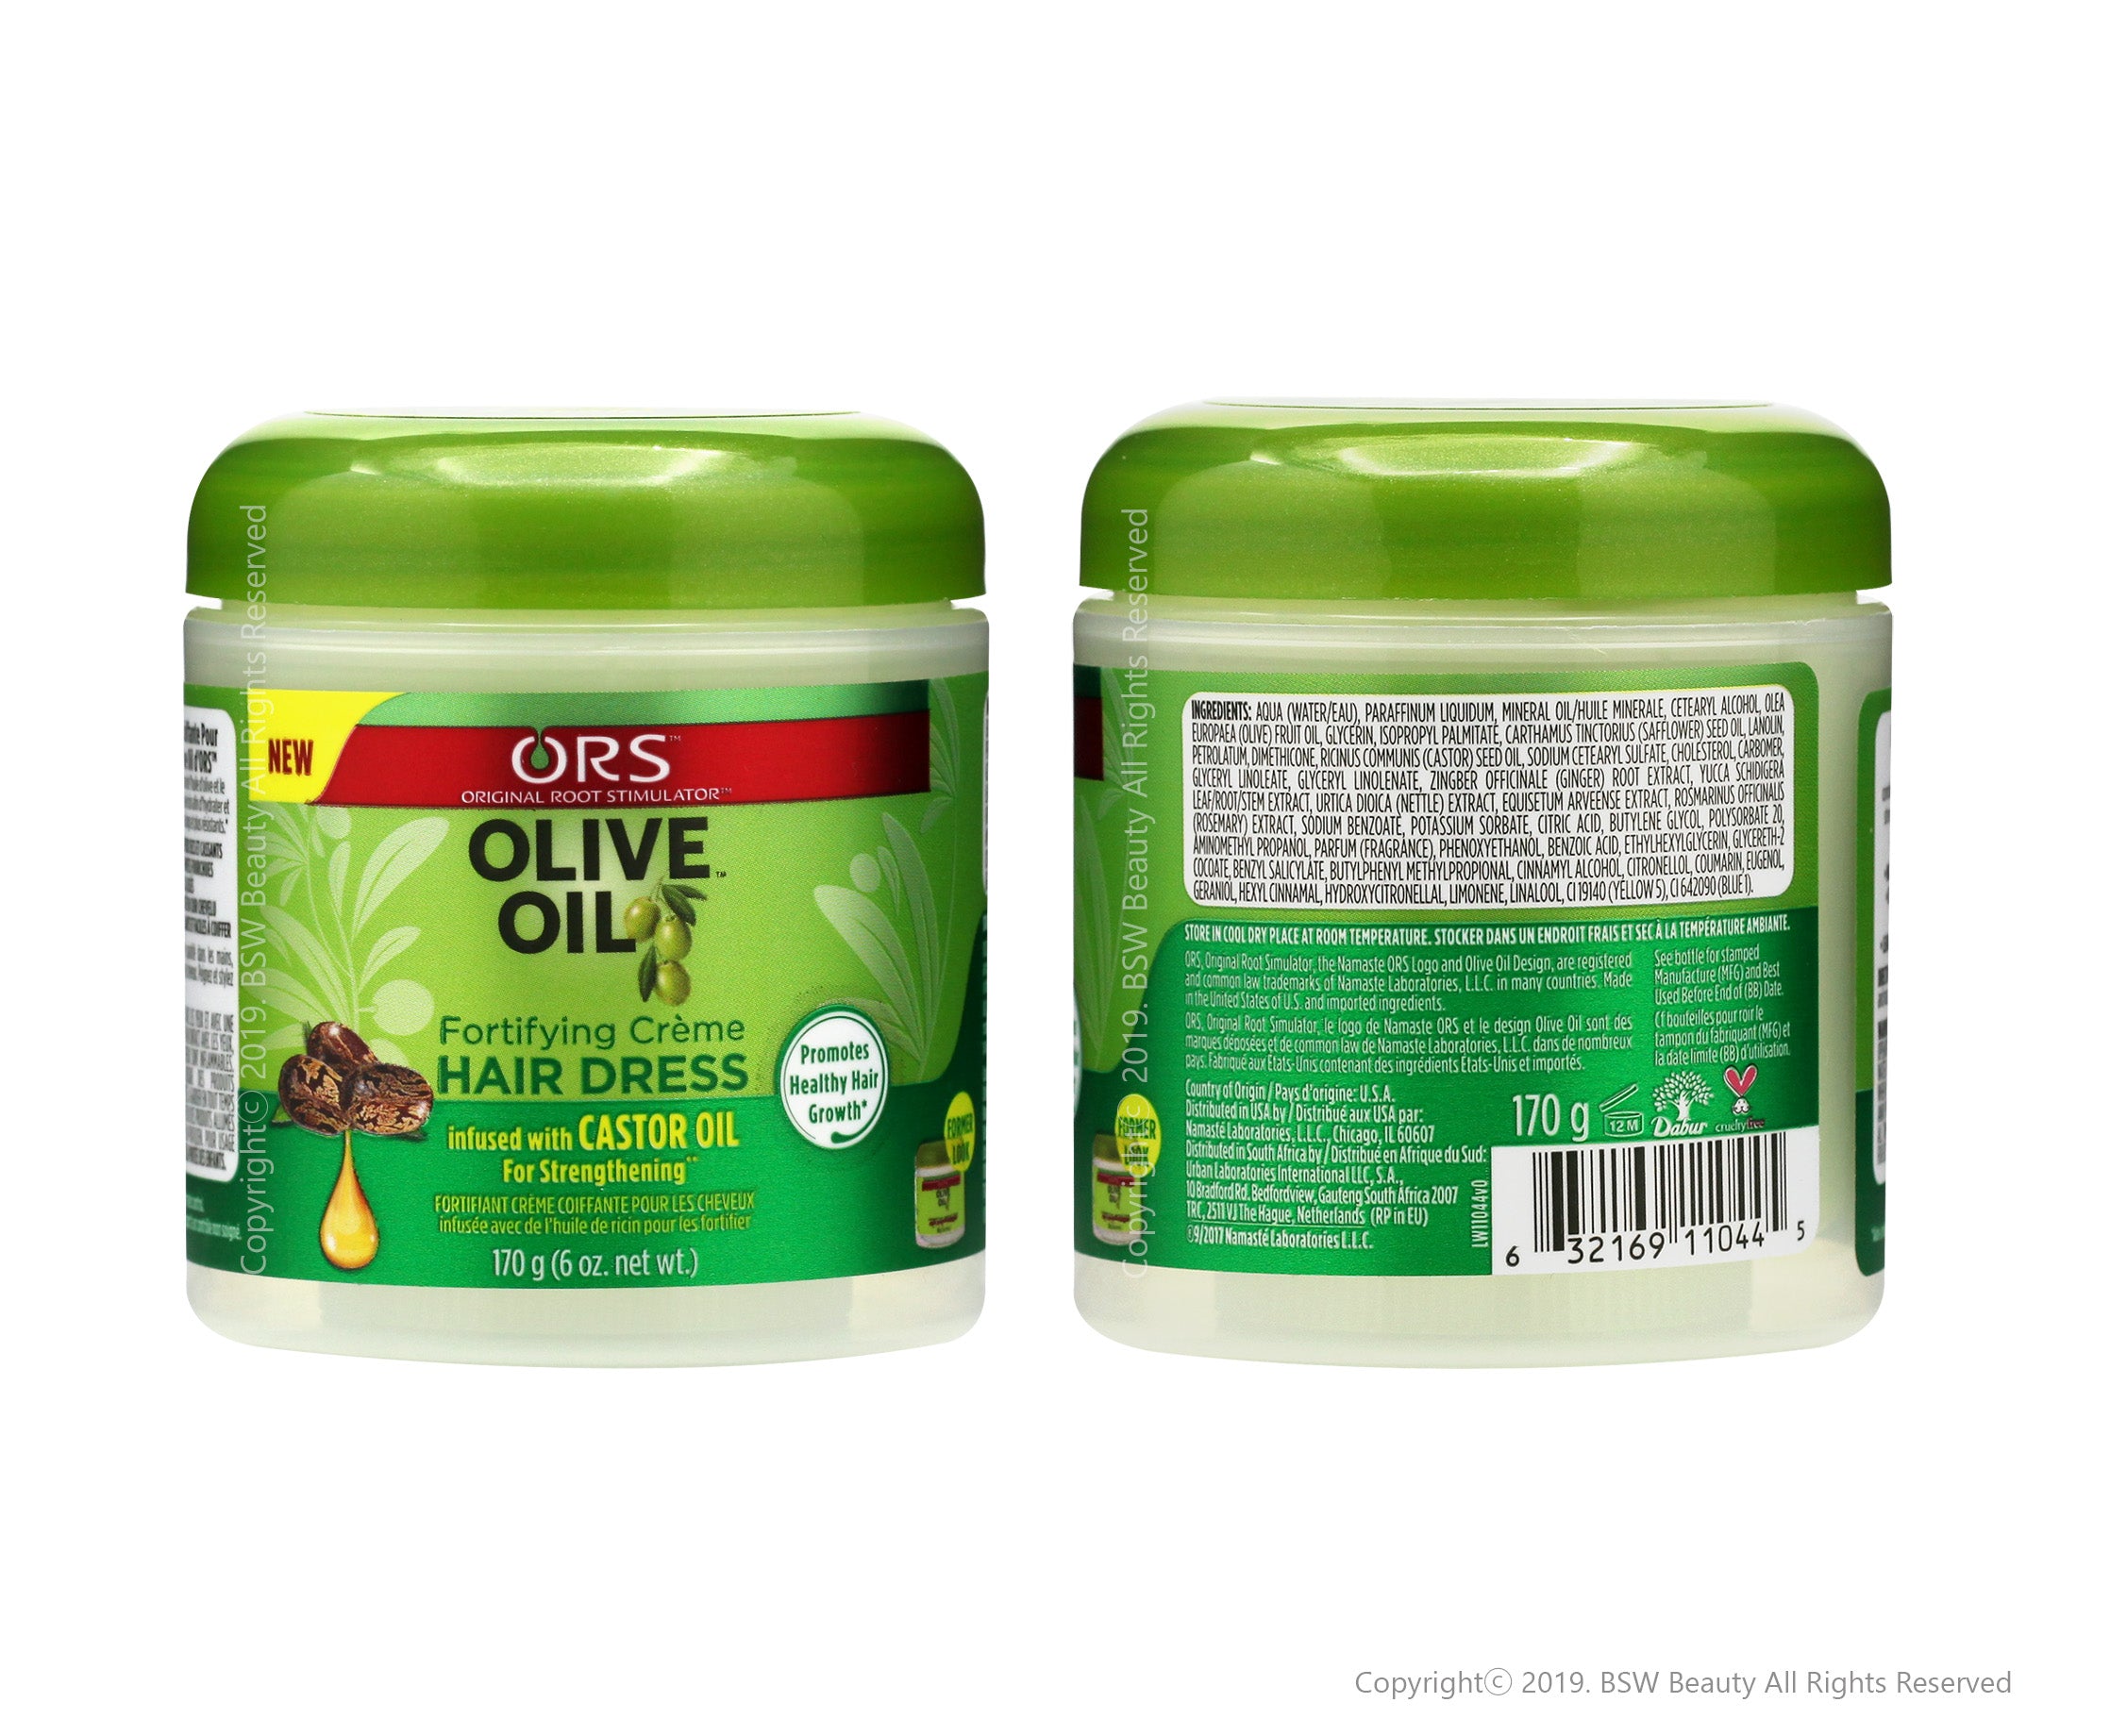 ORS OLIVE OIL FORTIFYING CREME HAIR DRESS 6oz